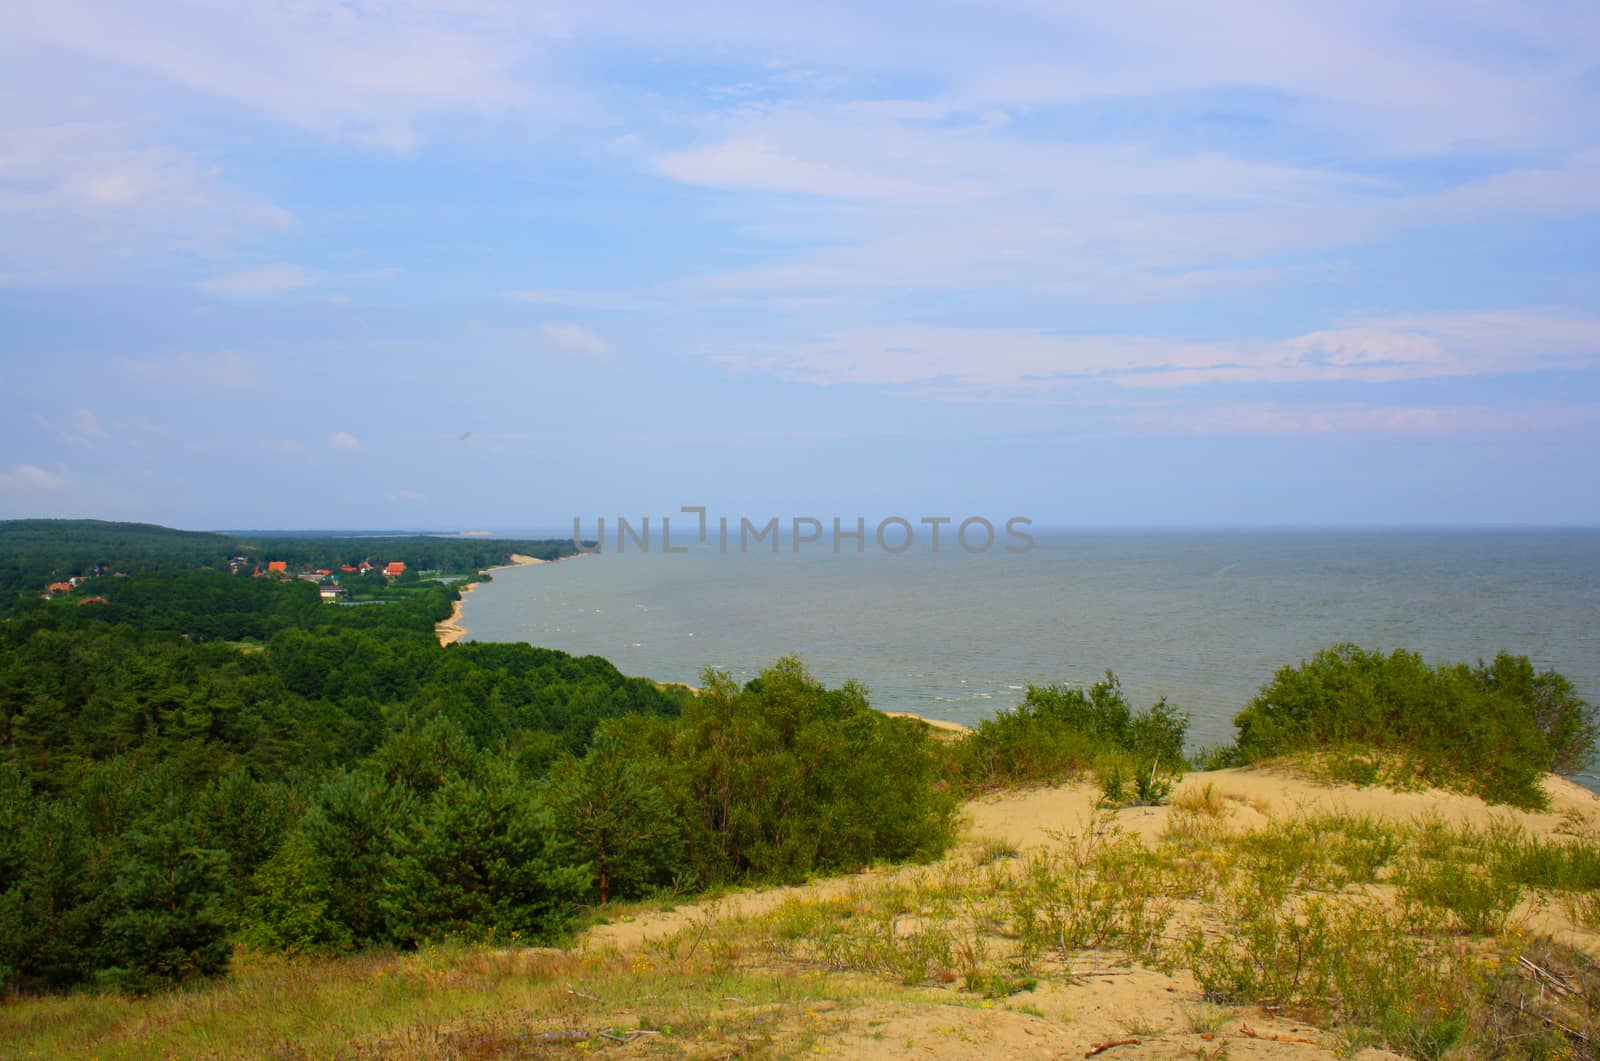 View of Dead Dunes, Curonian Spit, Lithuania